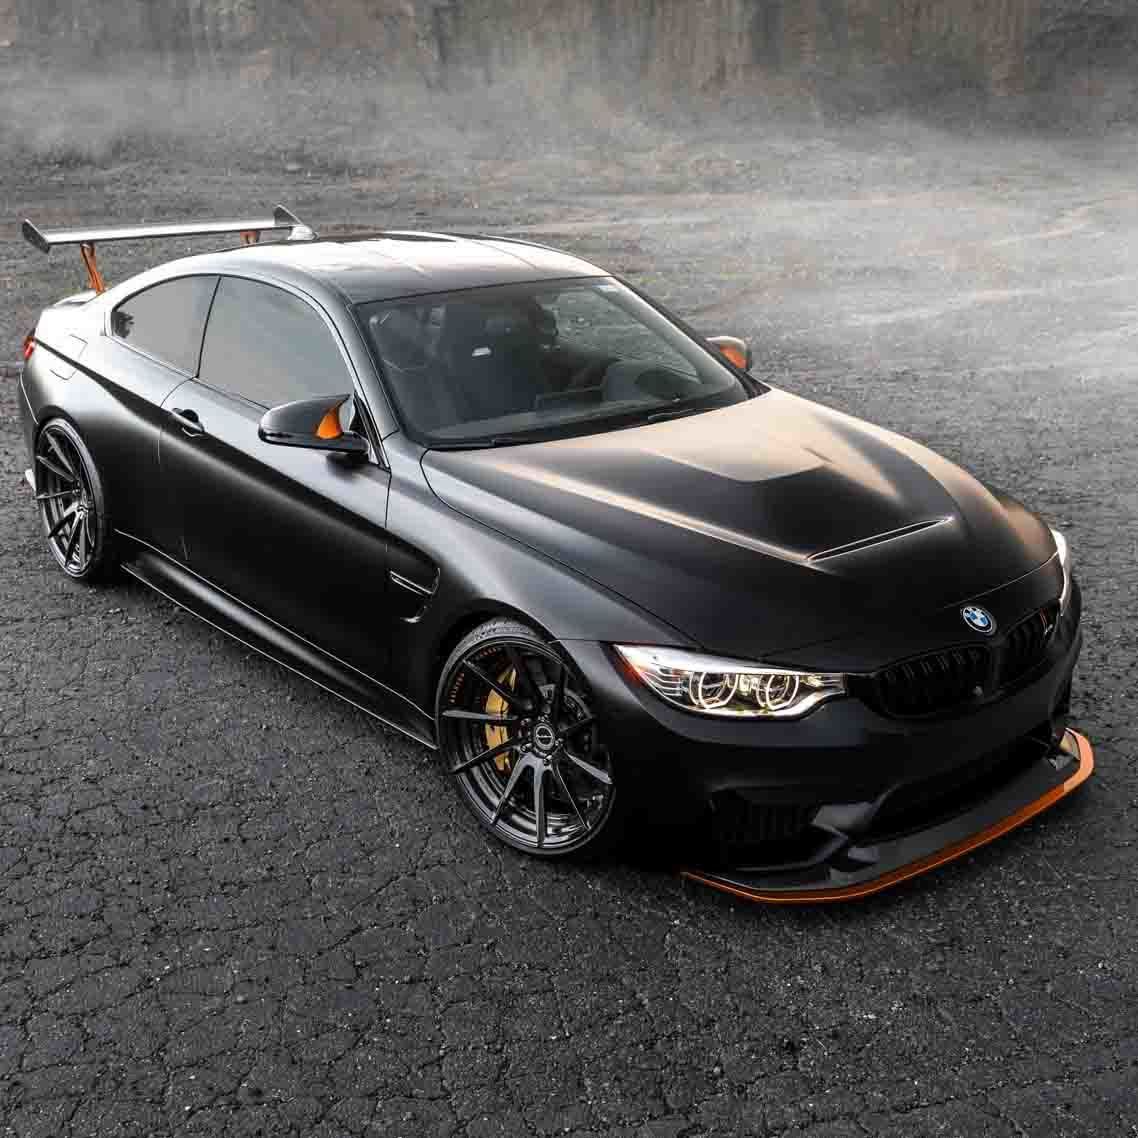 images-products-1-2794-232975082-matte-black-bmw-m4-gts-brixton-forged-r10d-duo-series-wheels-smoke-black-9.jpg